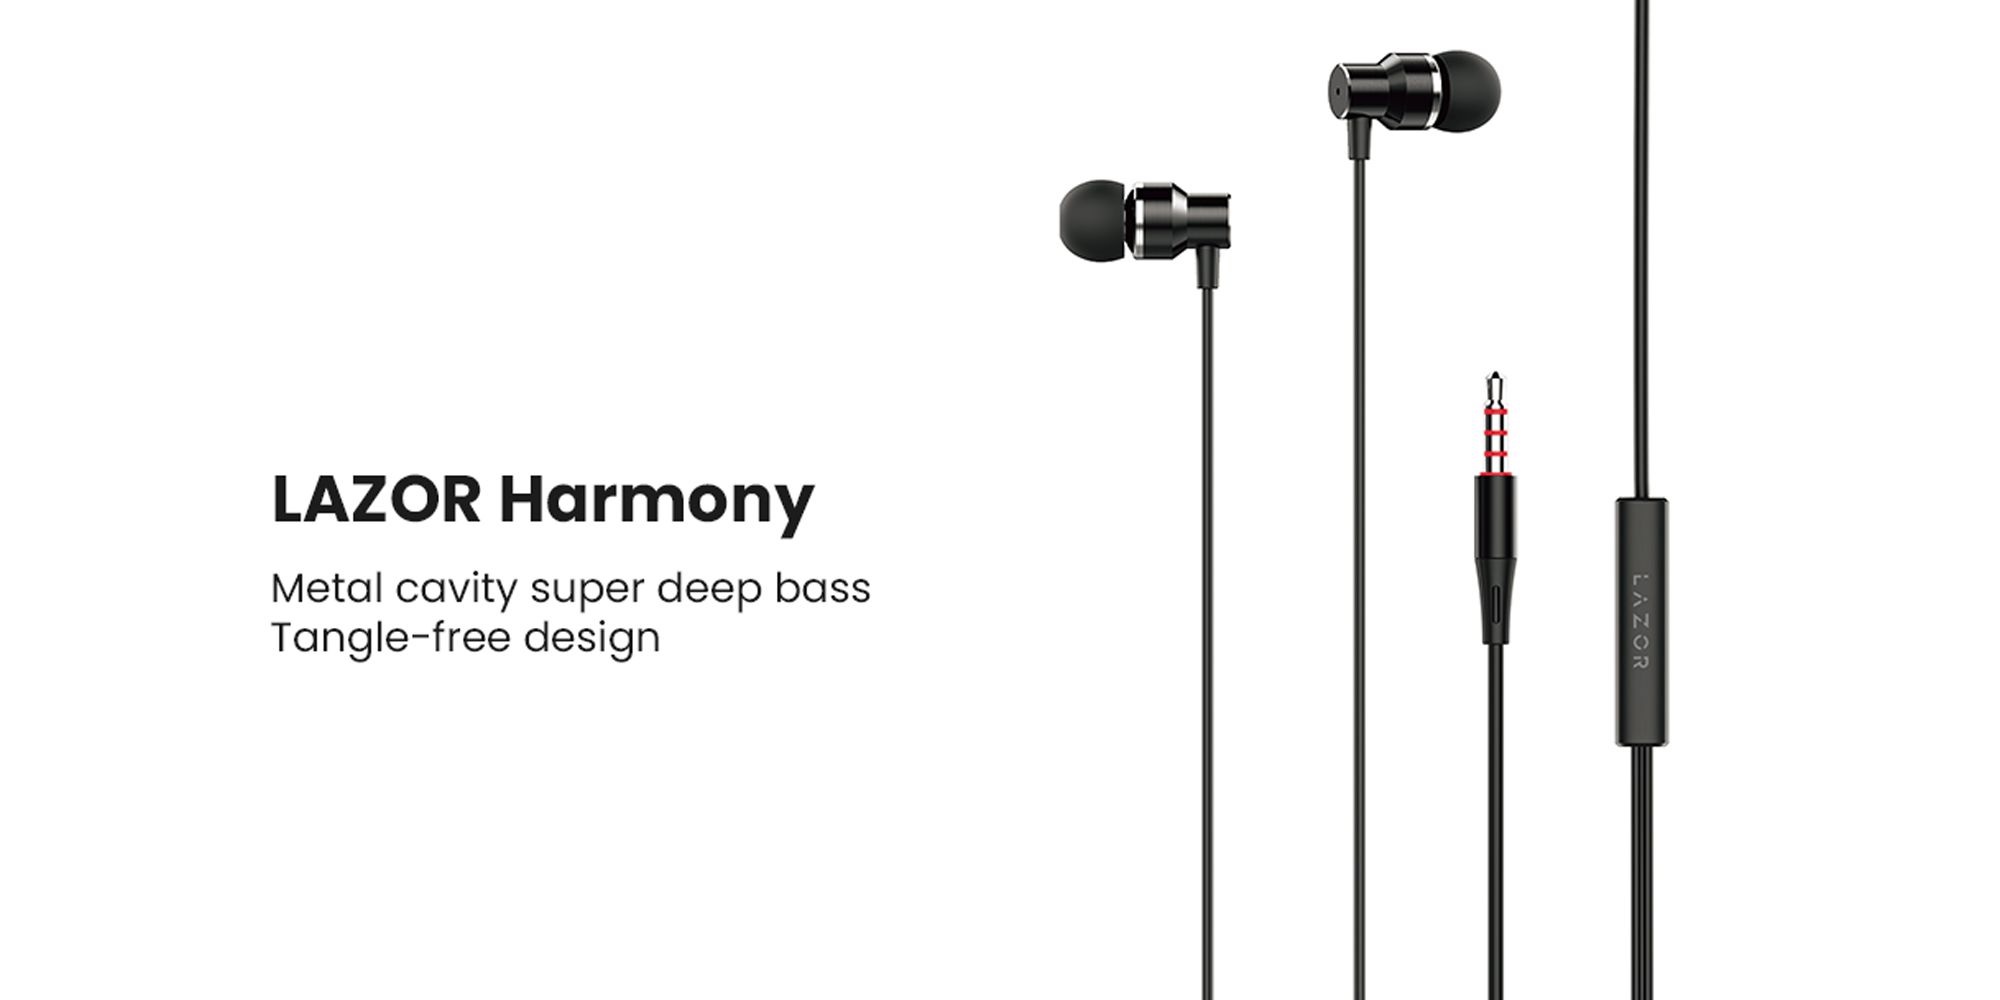 LAZOR Harmony EA36: In-Ear Wired Headphones, 3.5mm Jack, Premium Metallic Hi-Fi Stereo with Built-in Mic, Comfortable Secure Fit Earbuds - Black, 1.2m